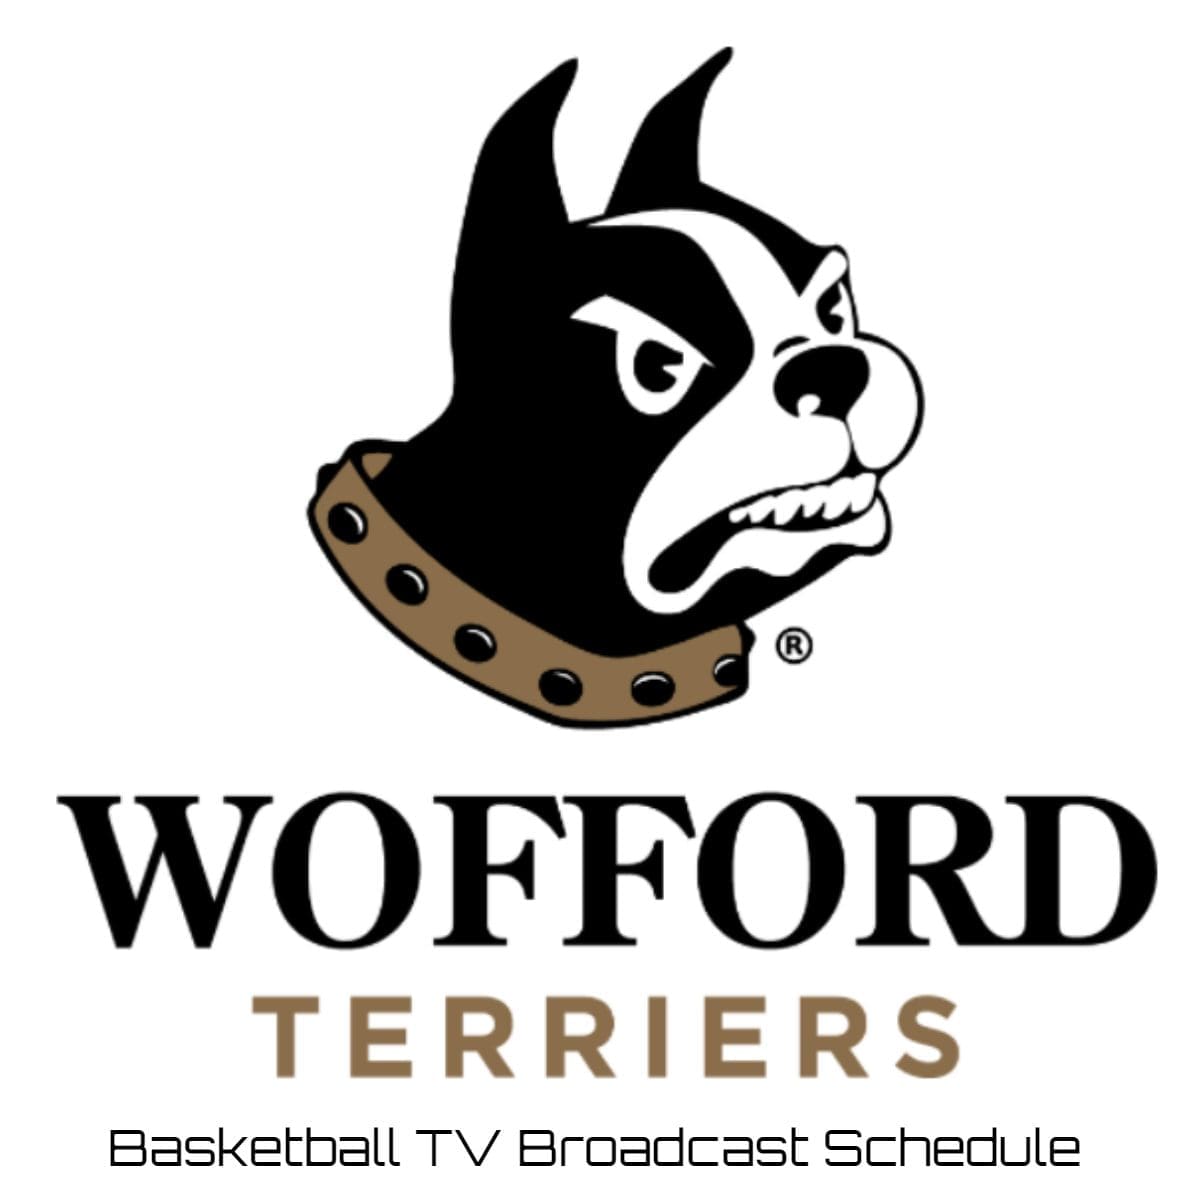 Wofford Terriers Basketball TV Broadcast Schedule